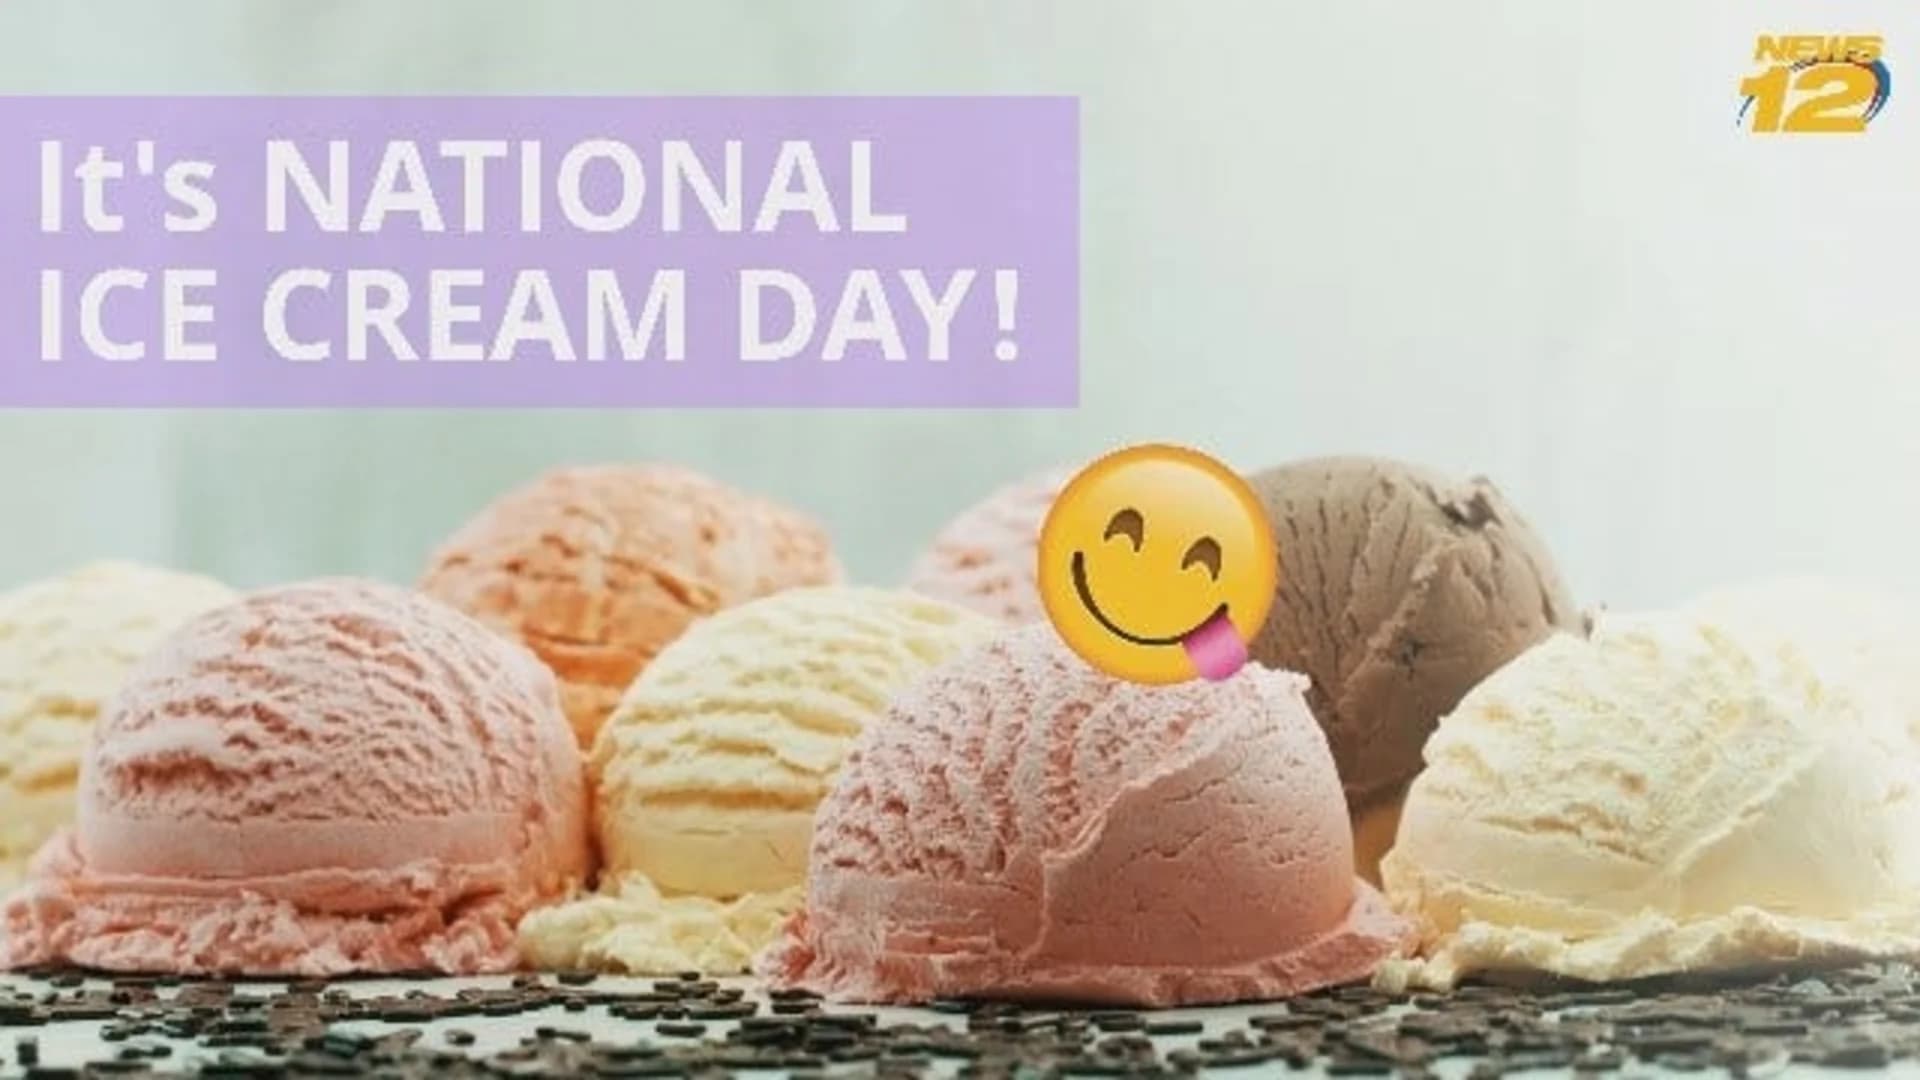 Get the scoop on deals and freebies for National Ice Cream Day